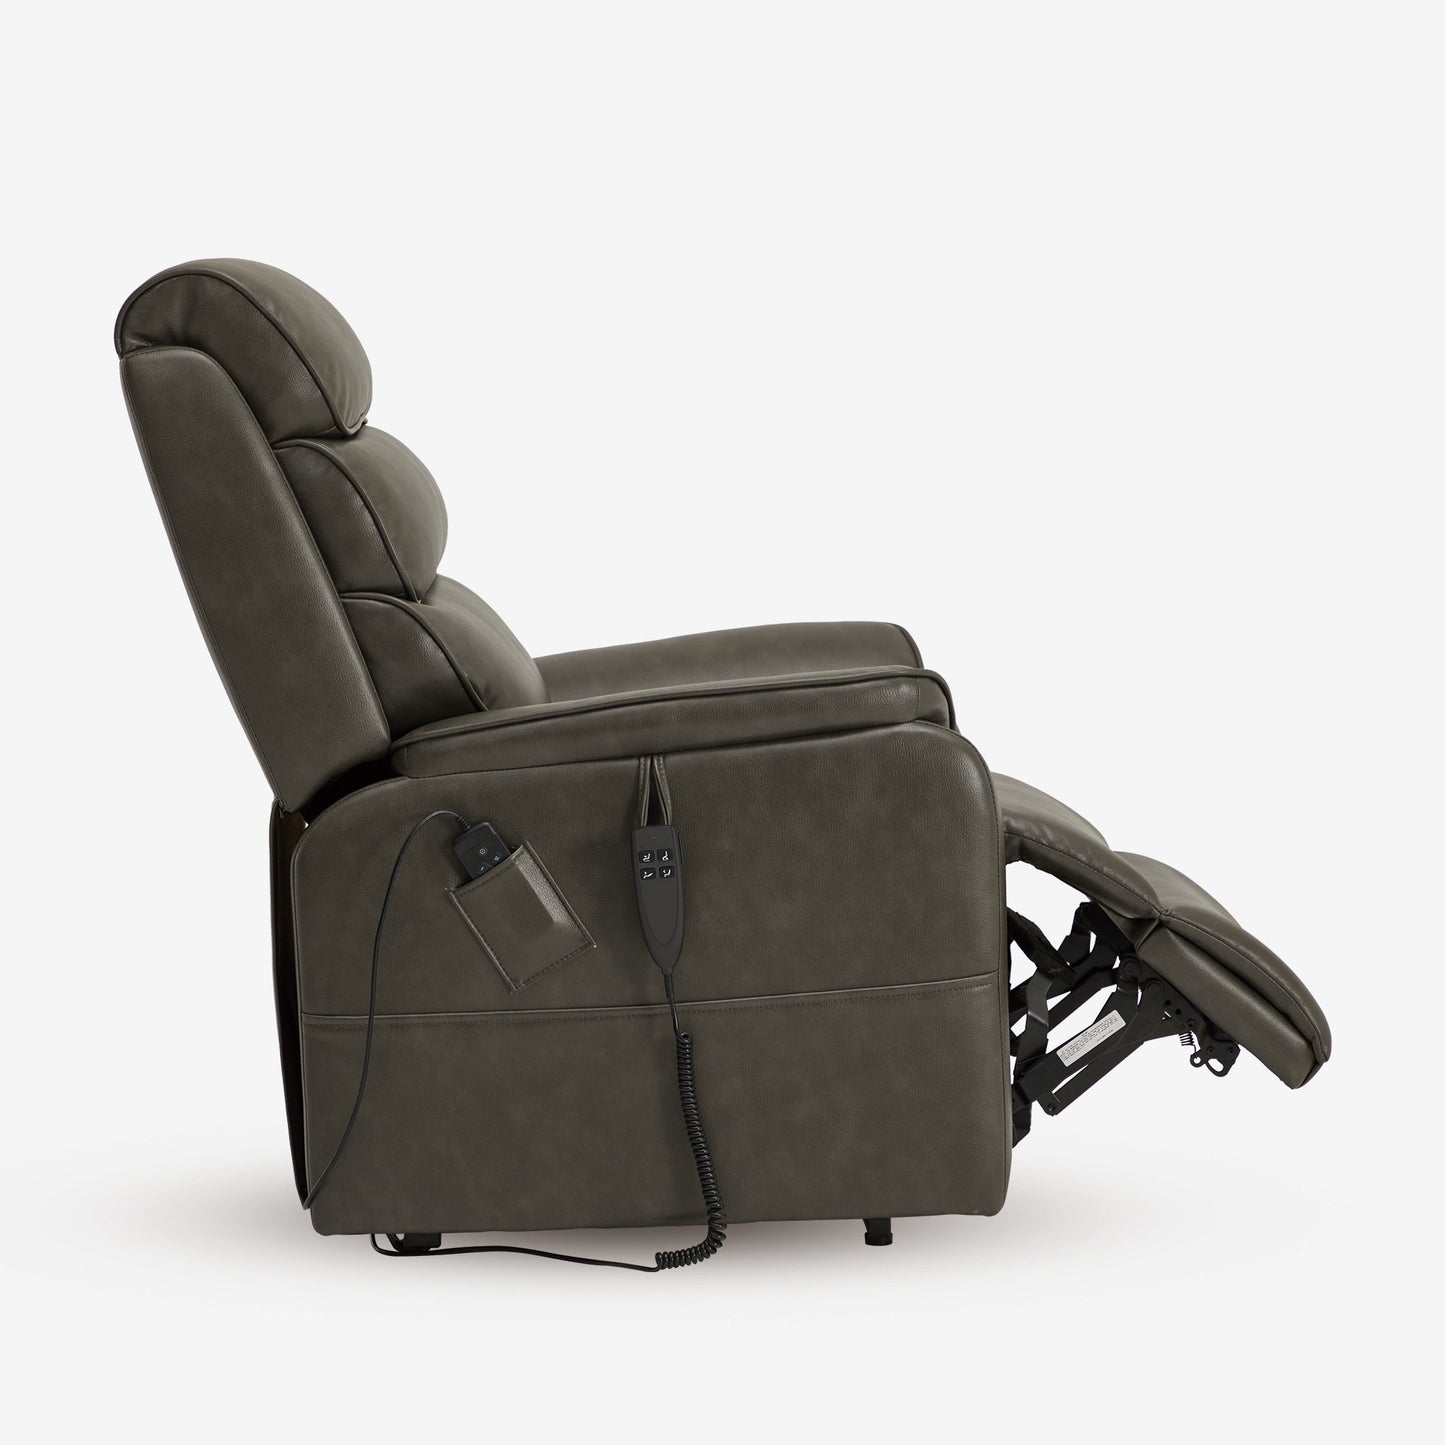 Best Recliners For Disabled Person With Heat Massage And Infinite Positons